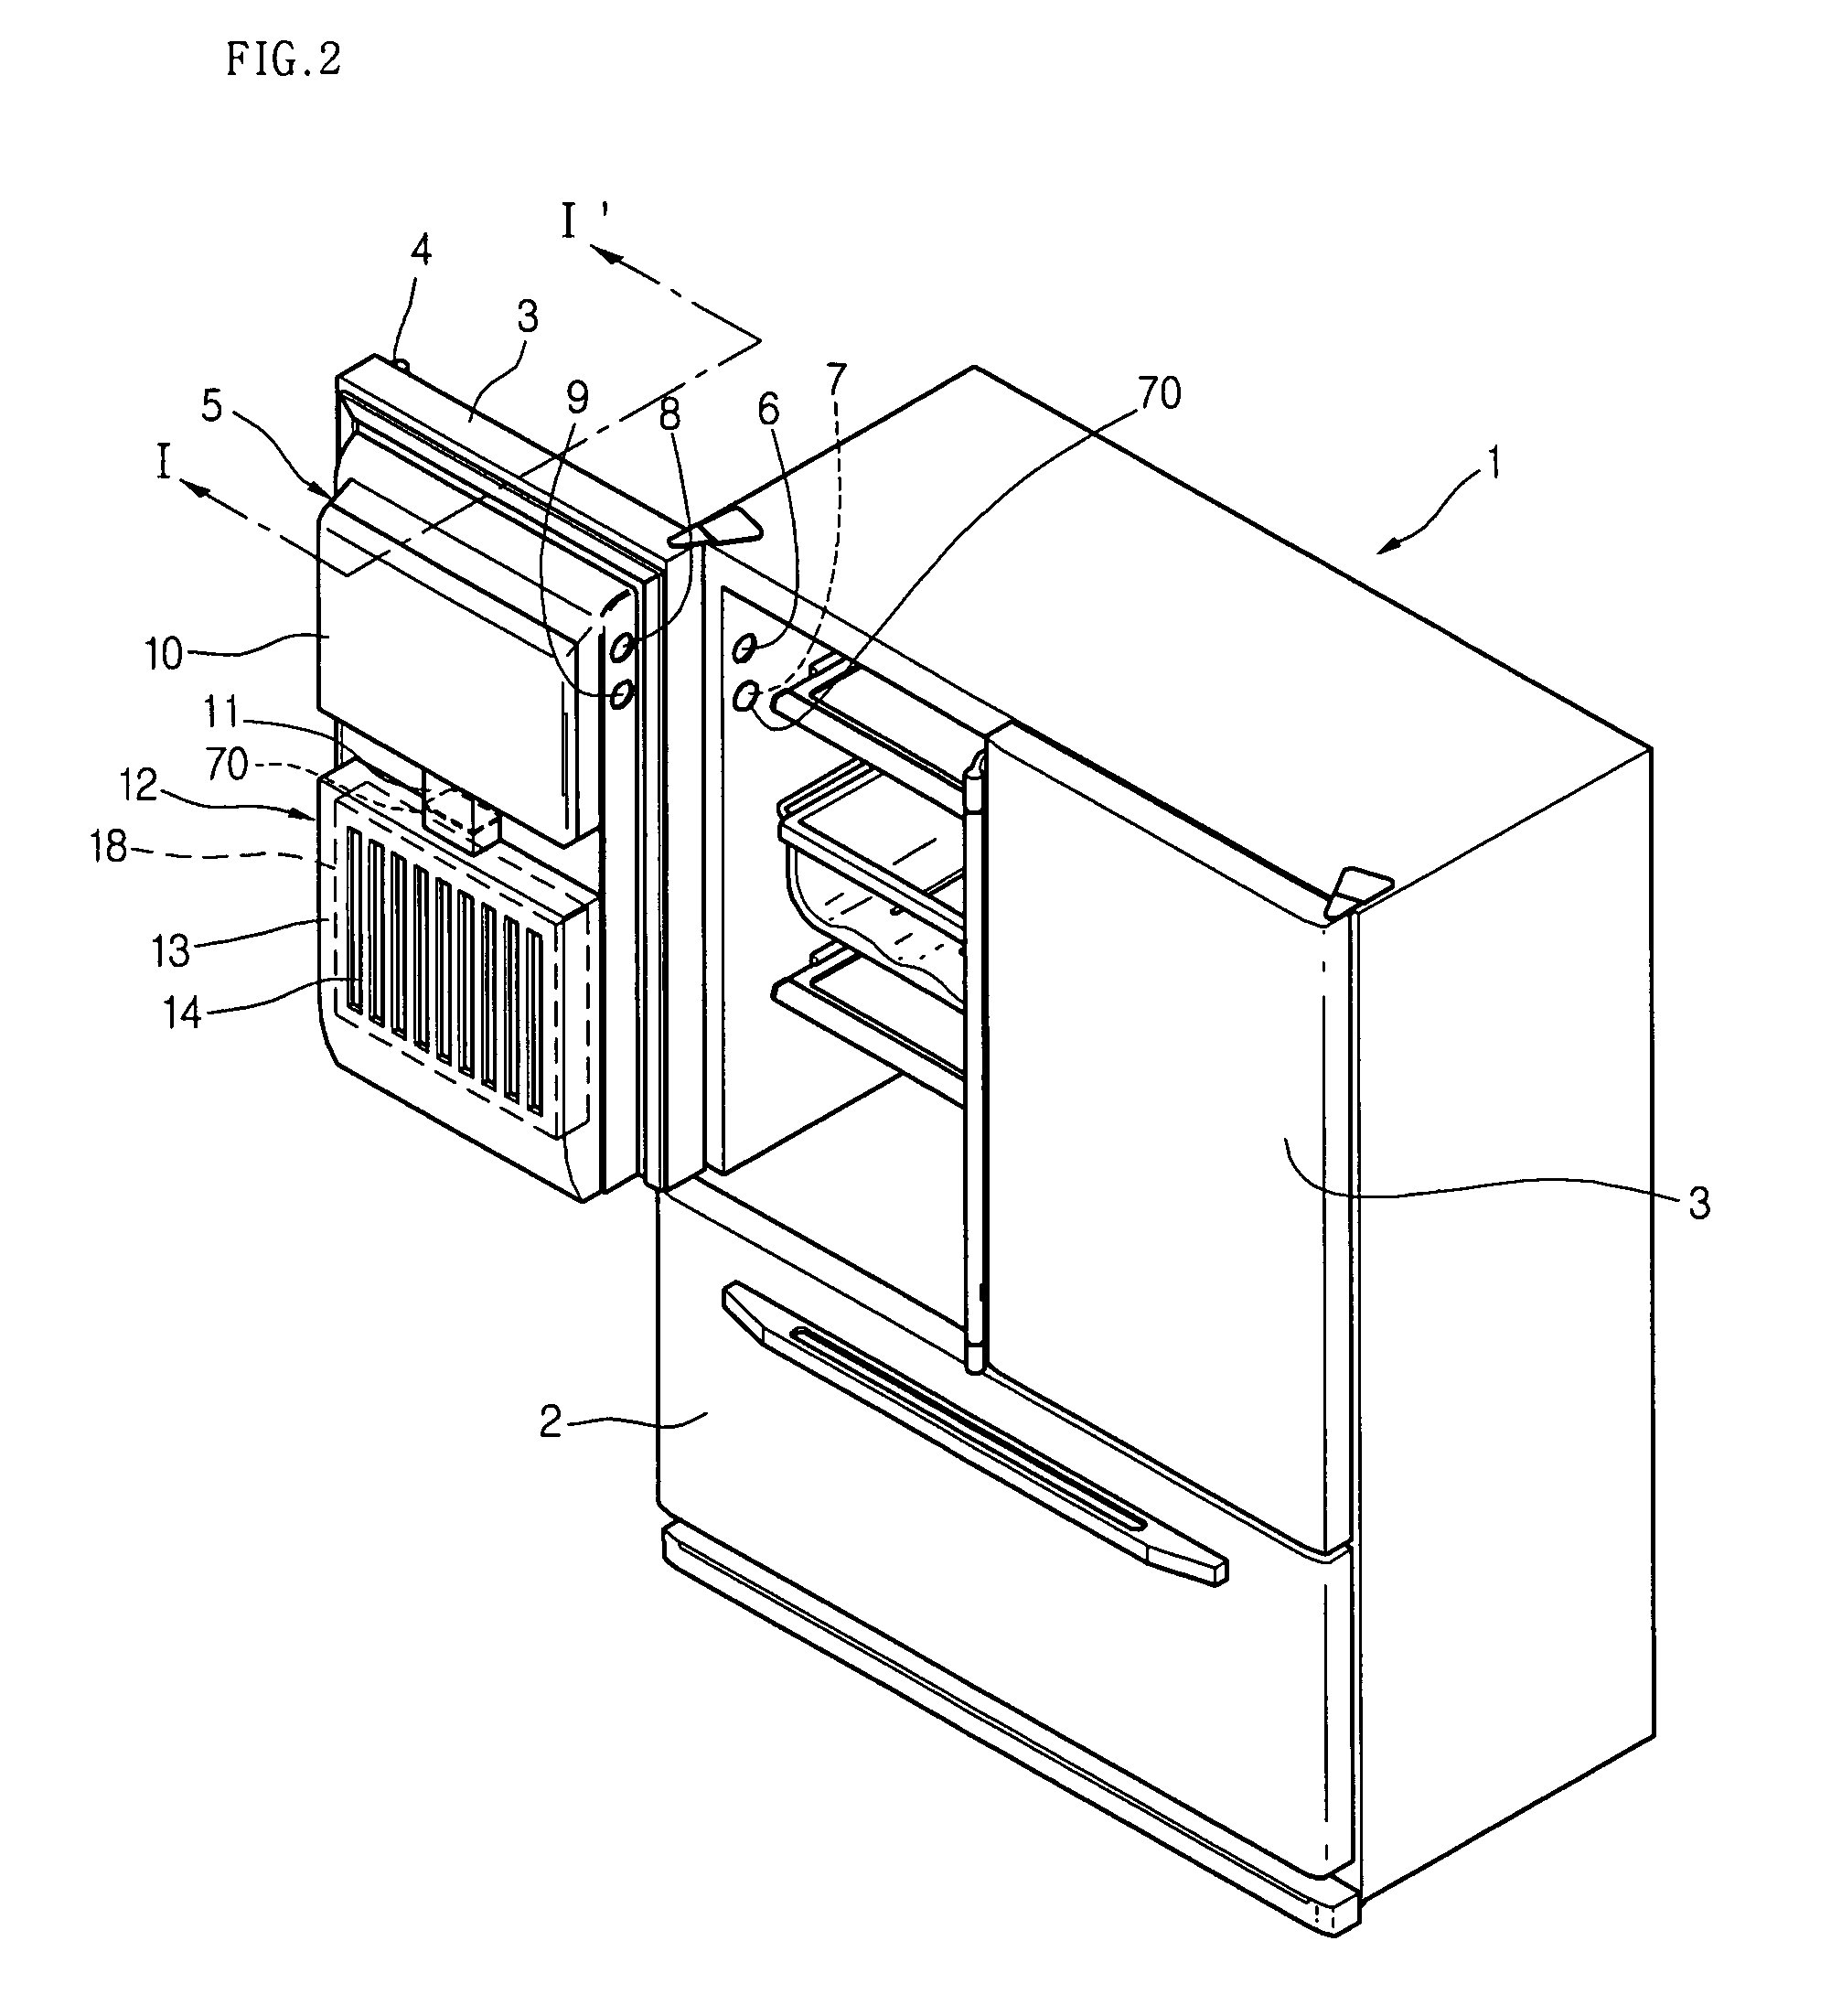 Cooling air flow passage of refrigerator